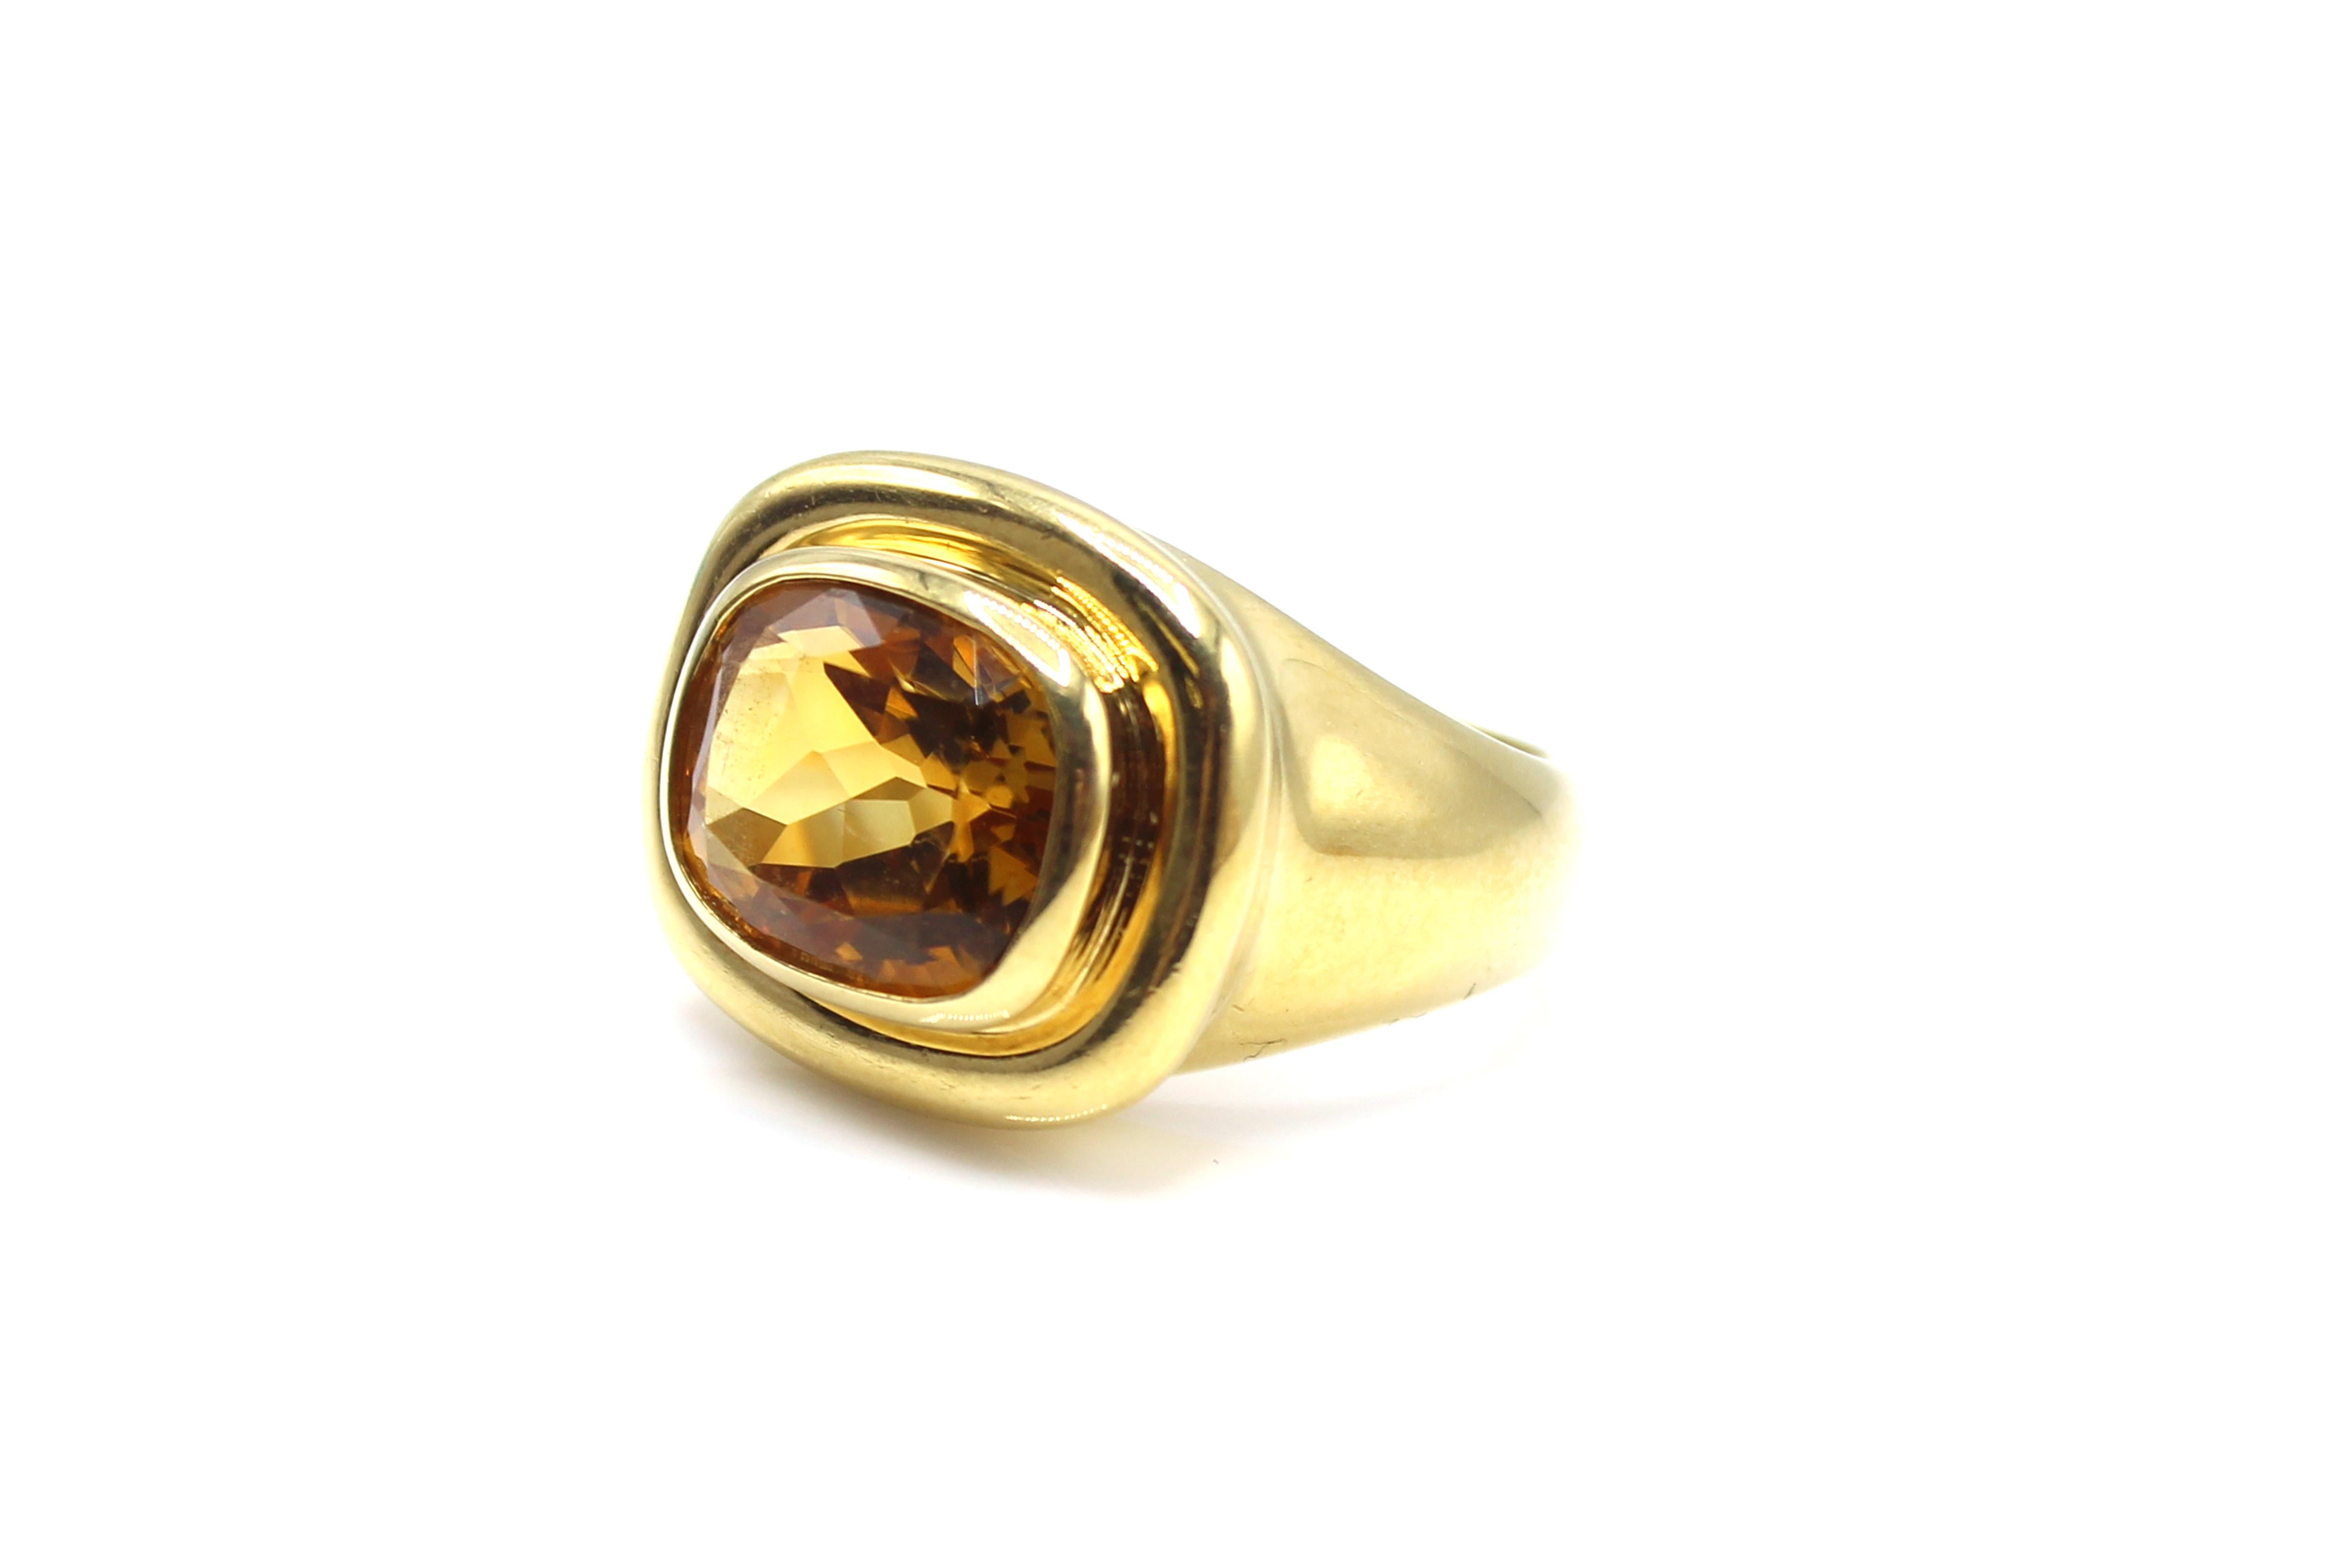 This Paloma Picasso for Tiffany & Co ring is centrally set with a deep honey/gold colored citrine measured to weigh approximately 6.5 carats. The bold design and great craftsmanship of this hand-crafted 18 karat yellow gold ring is the typical